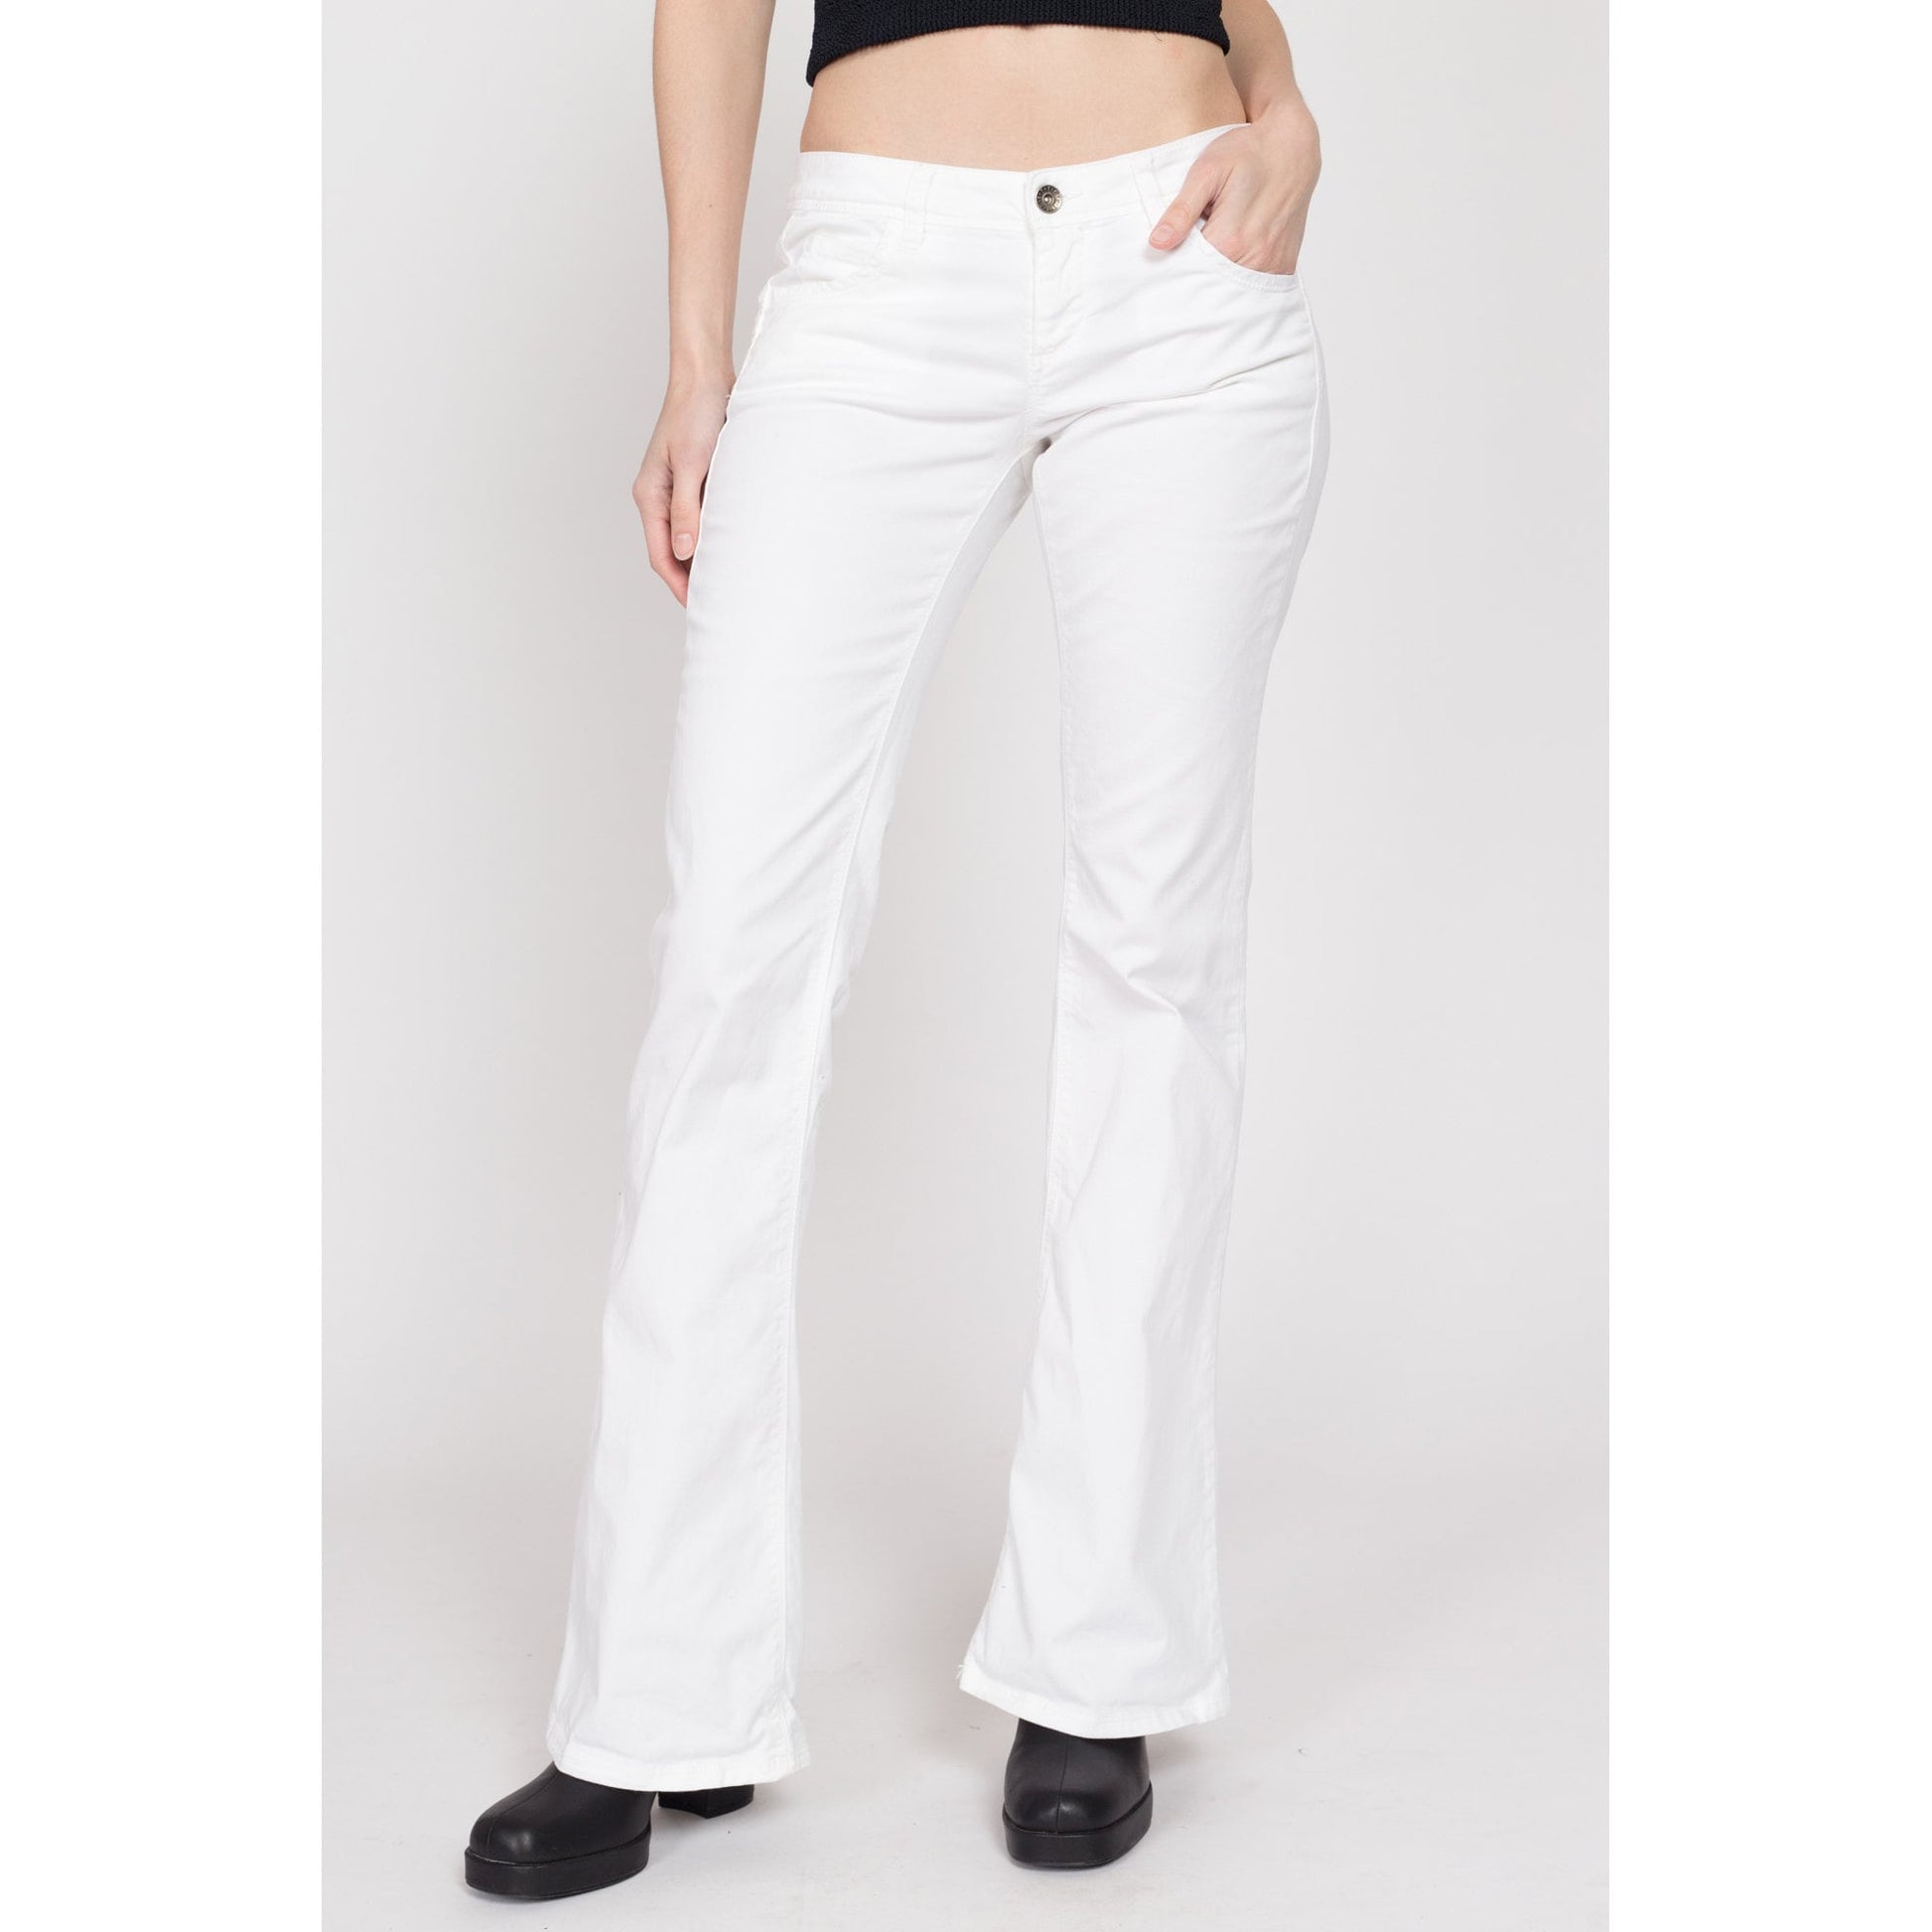 Small Y2K United Colors of Benetton White Low Rise Flares | Vintage Twill Bell Bottoms Low Rider Flared Pants